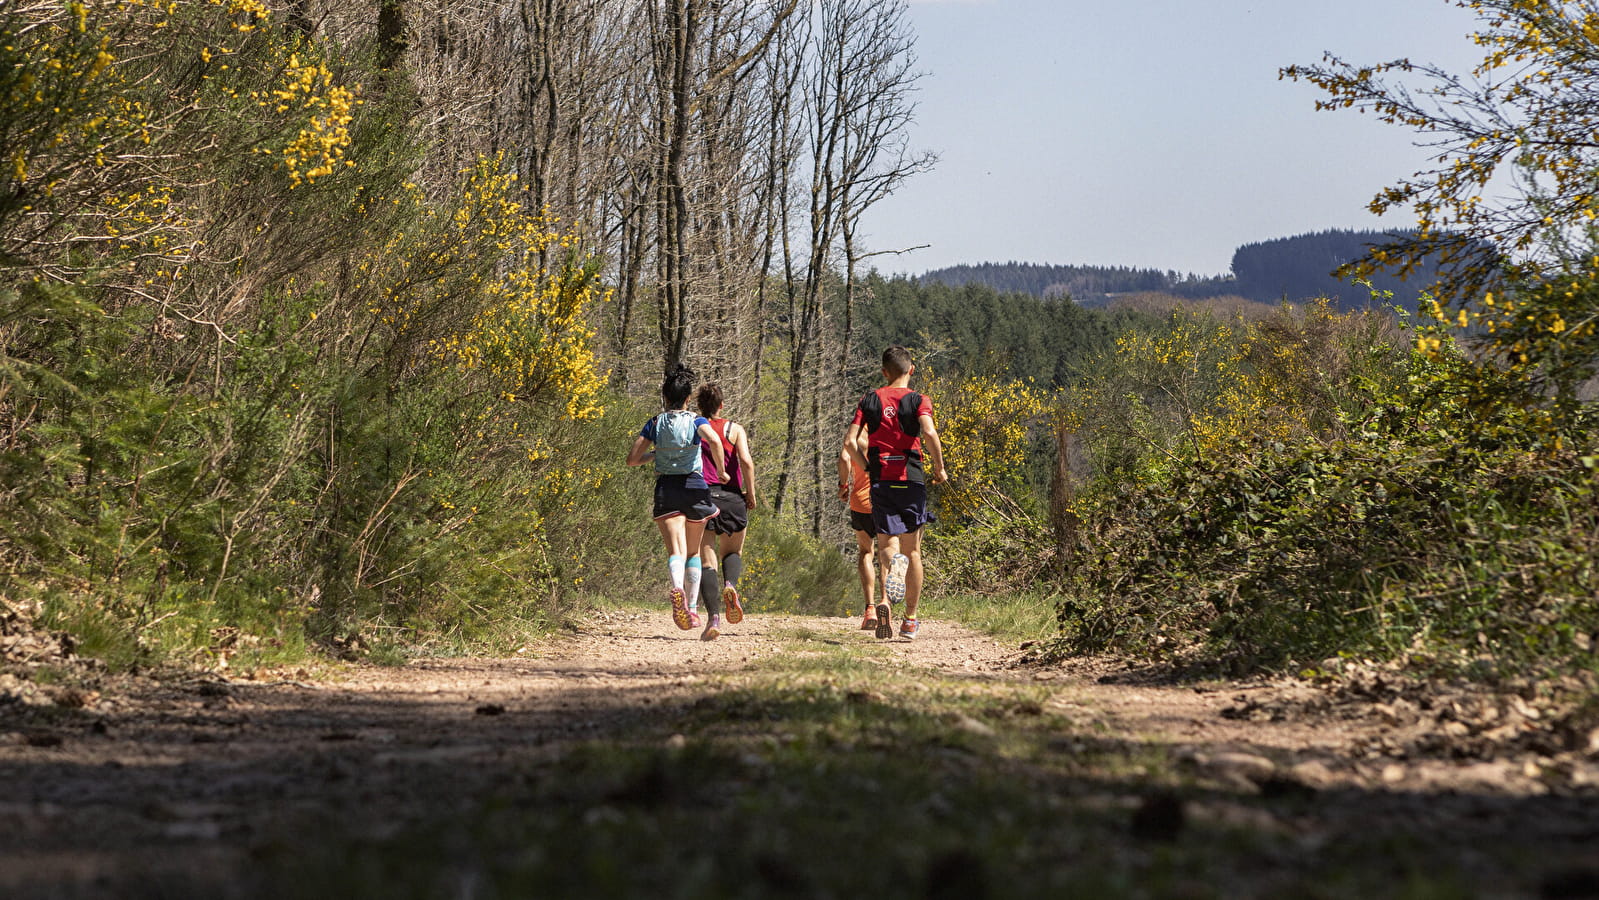 Trailrunning-Route : Chateau-Chinon Loop n°1